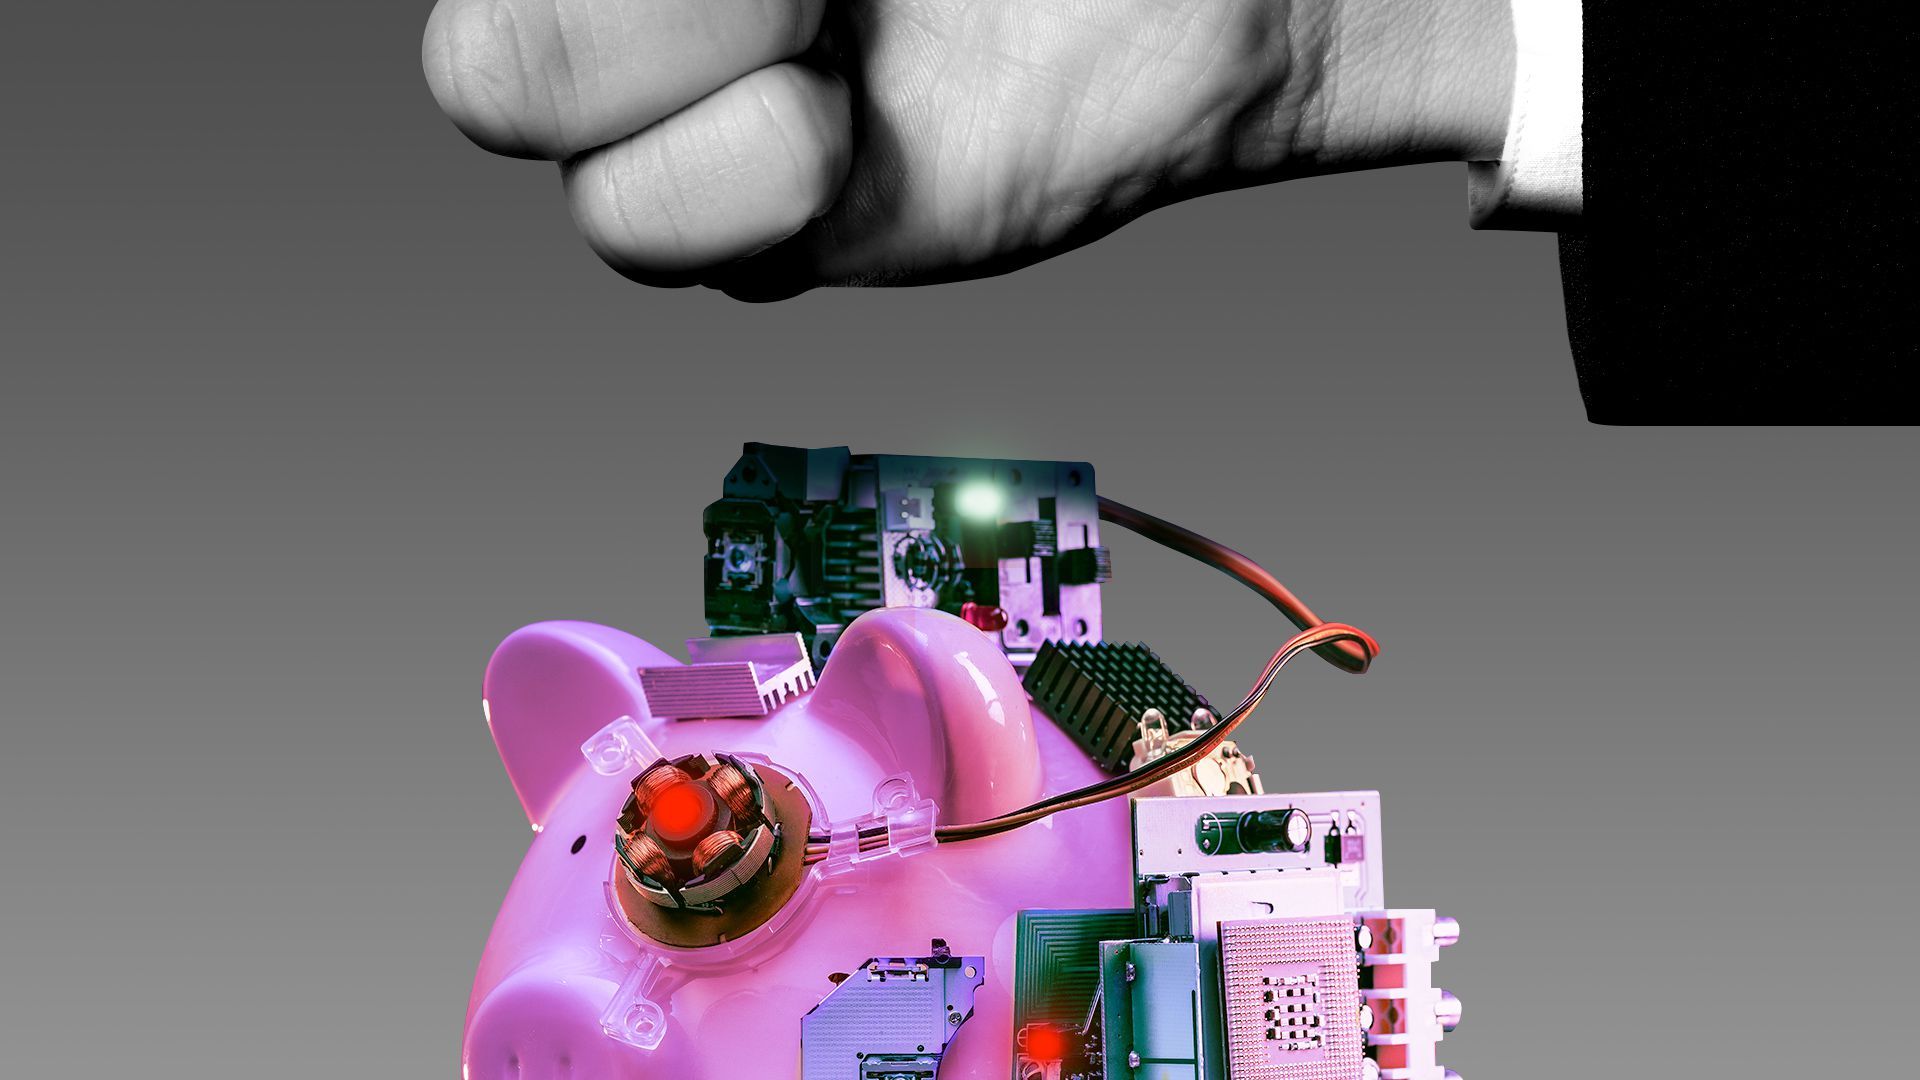 Illustration of a cyberpunk themed piggy bank with a fist hovering above it menacingly.